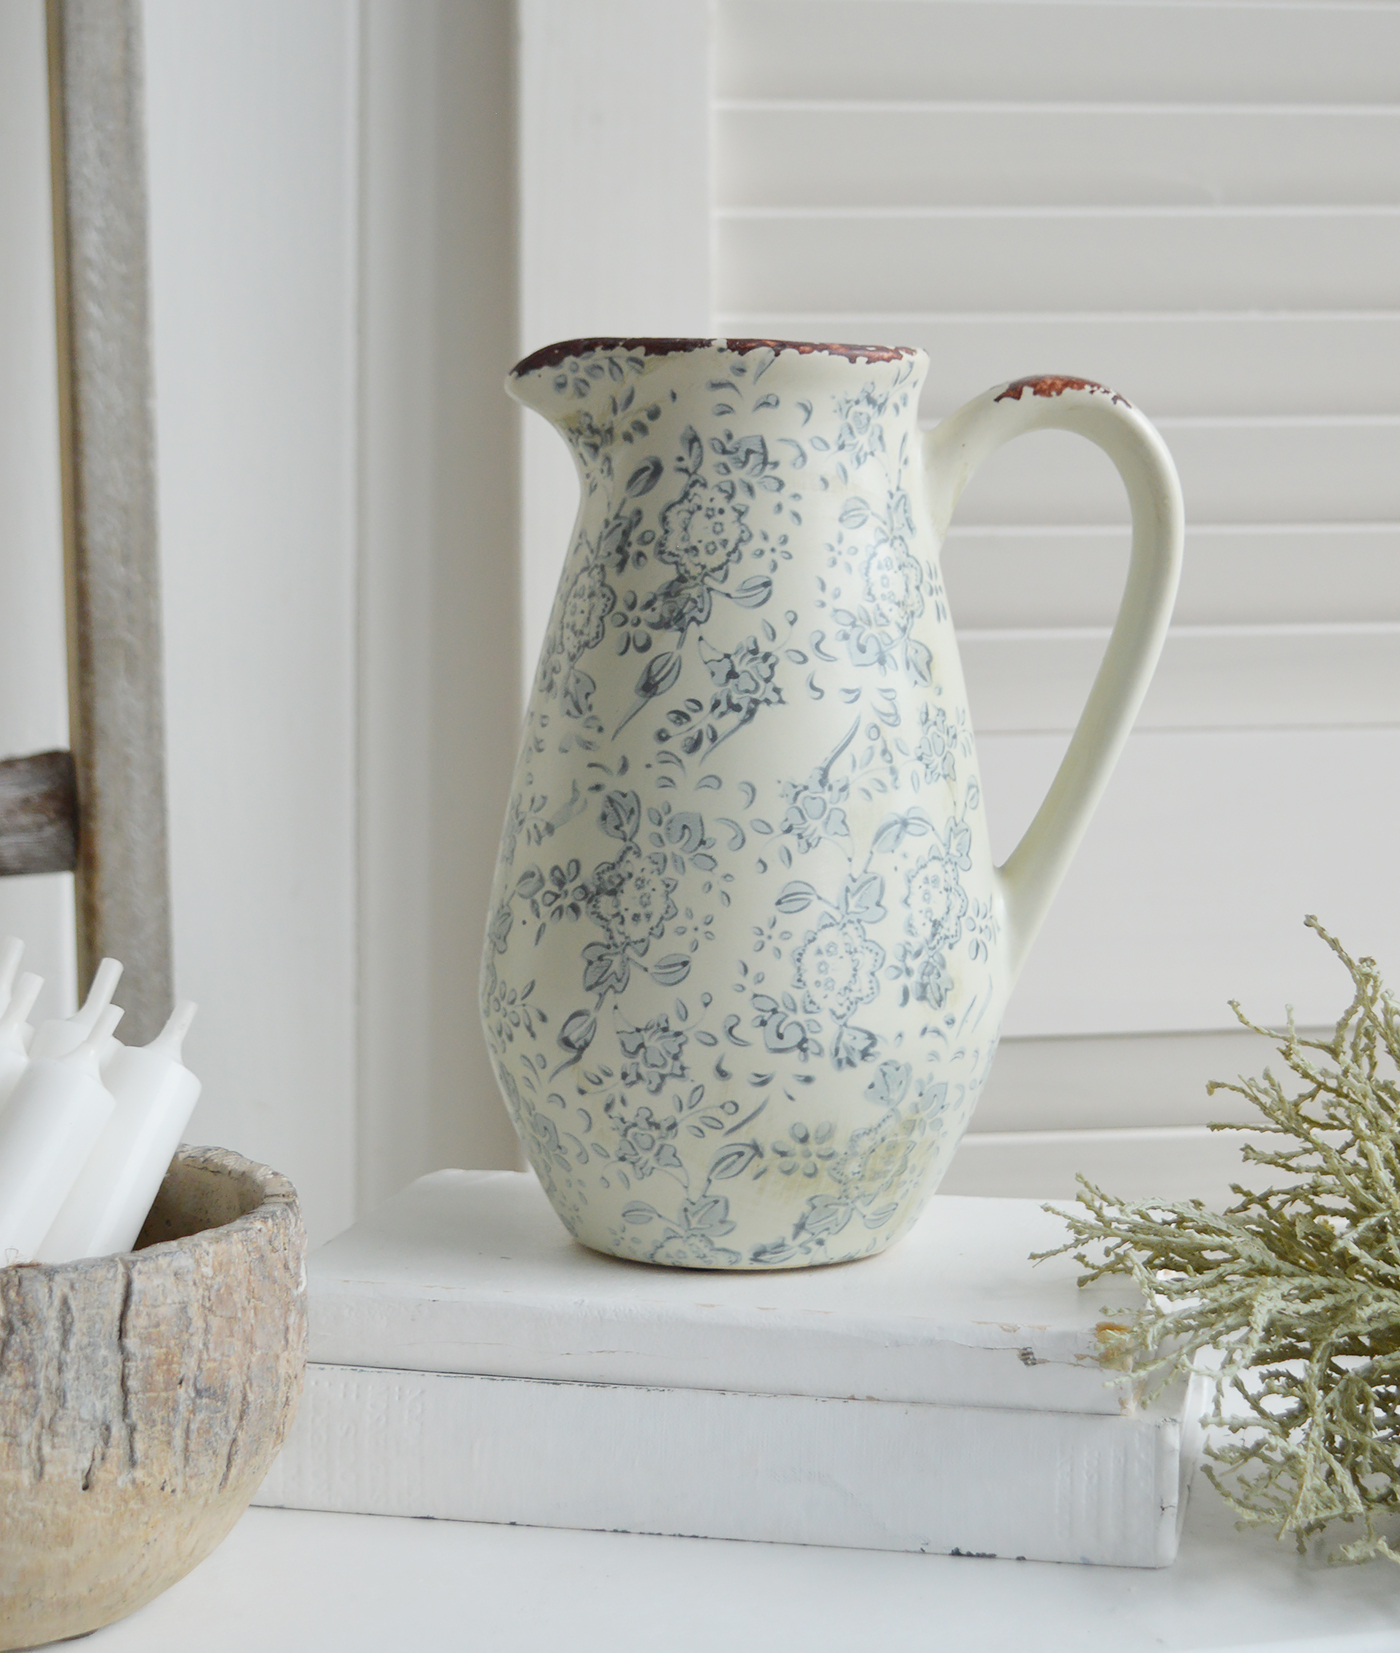 Claremont range of ceramics, a jug as a vase in pale grey blues pot for New England styling. Coastal, modern farmhouse furniture and home decor